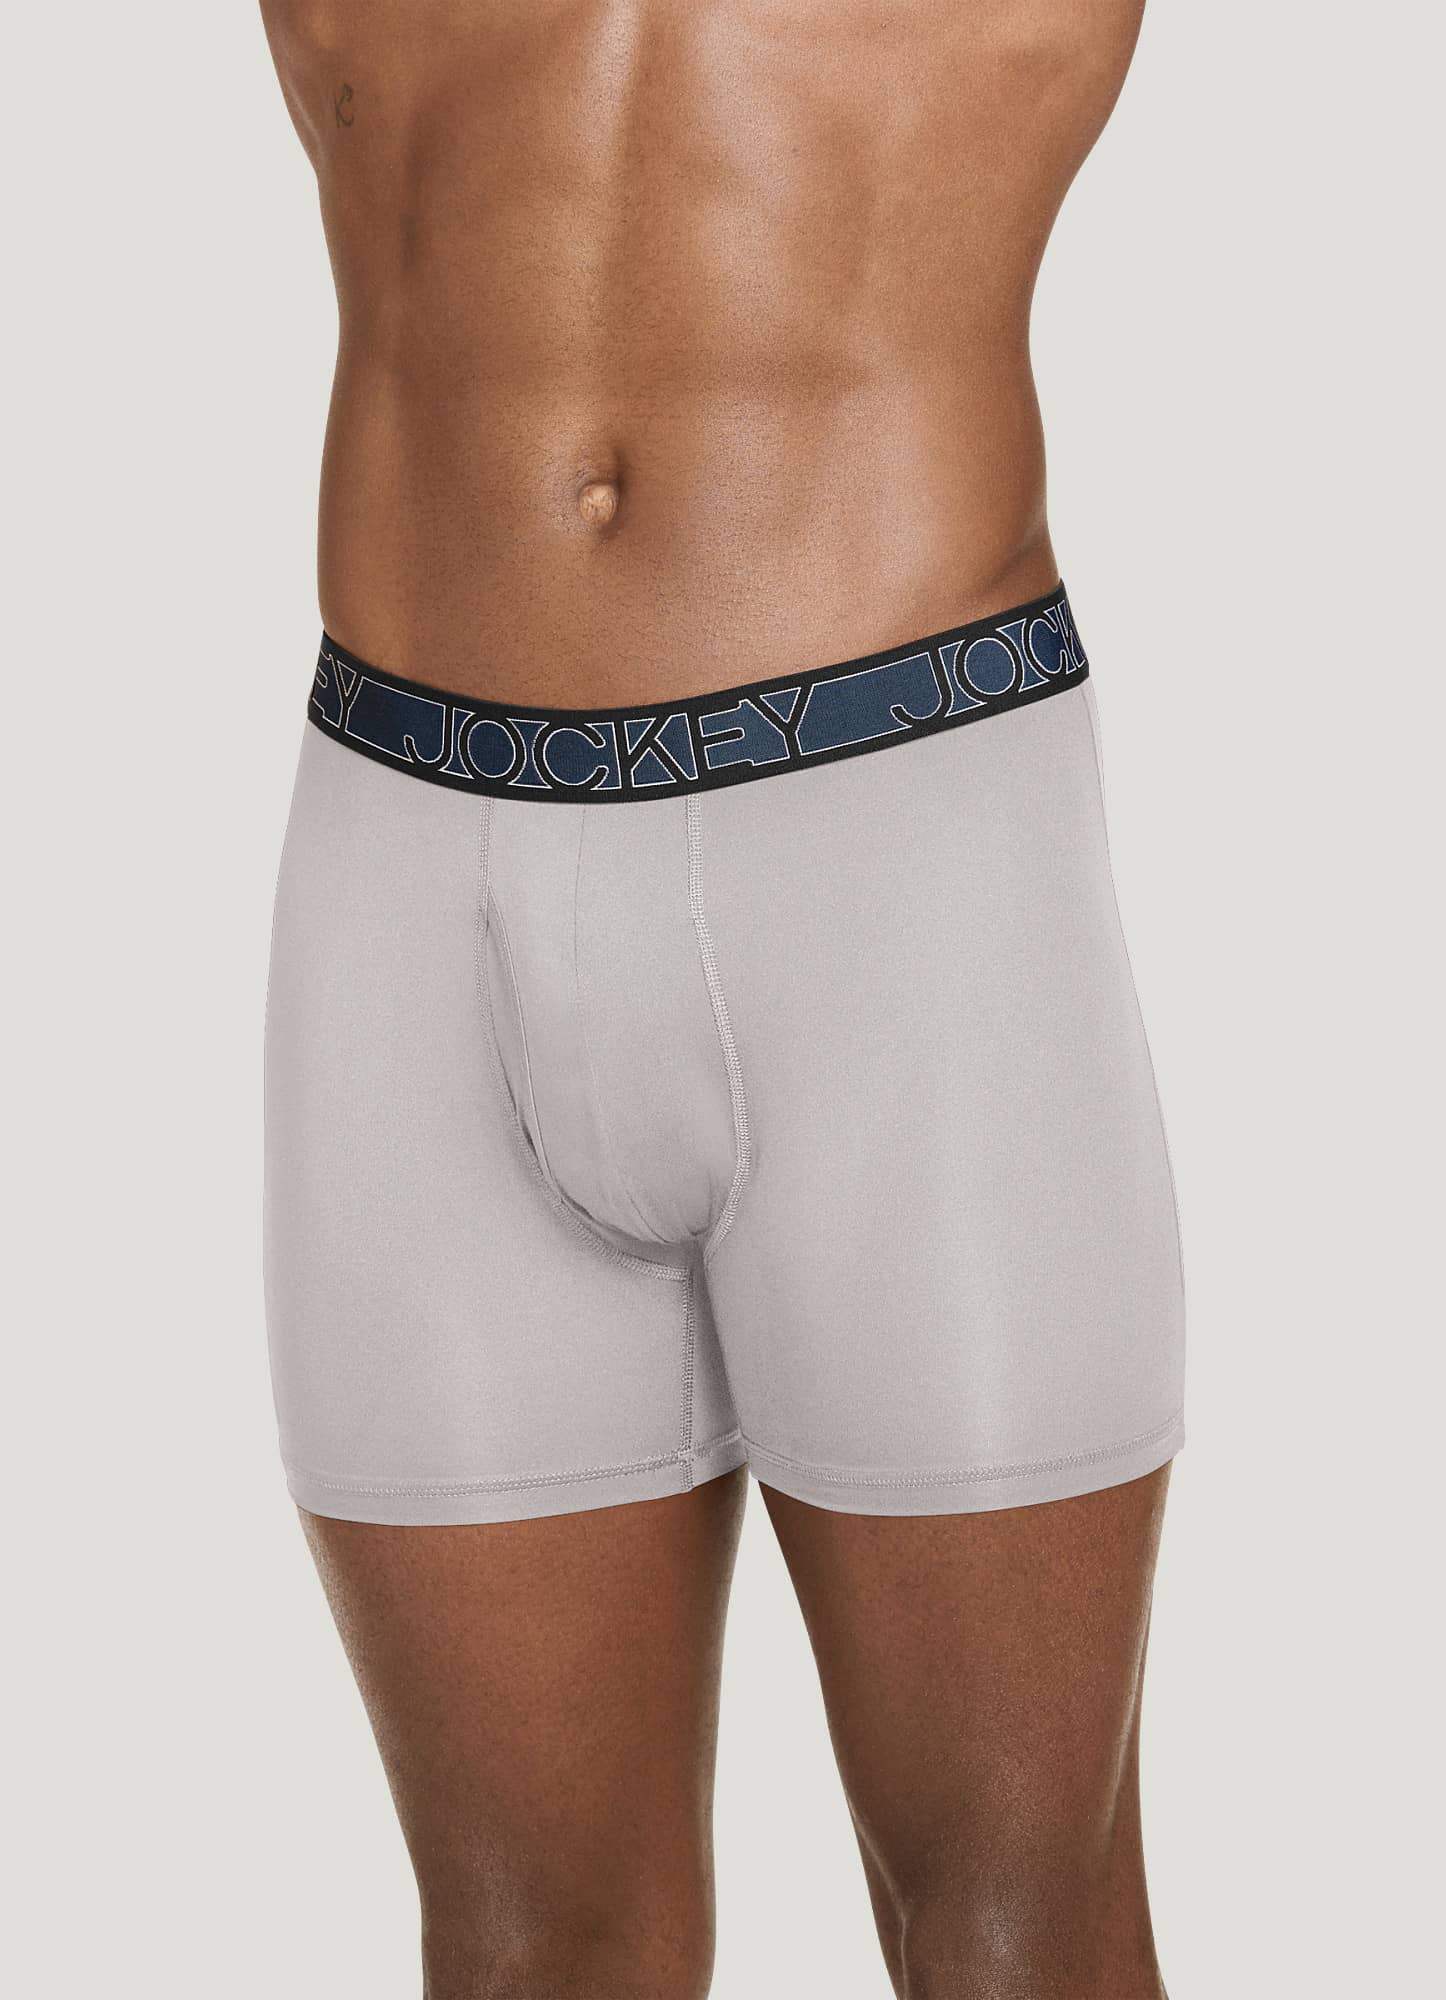 F & F 3 Pack Men’s Hipsters Cotton With Stretch Size Large Boxers